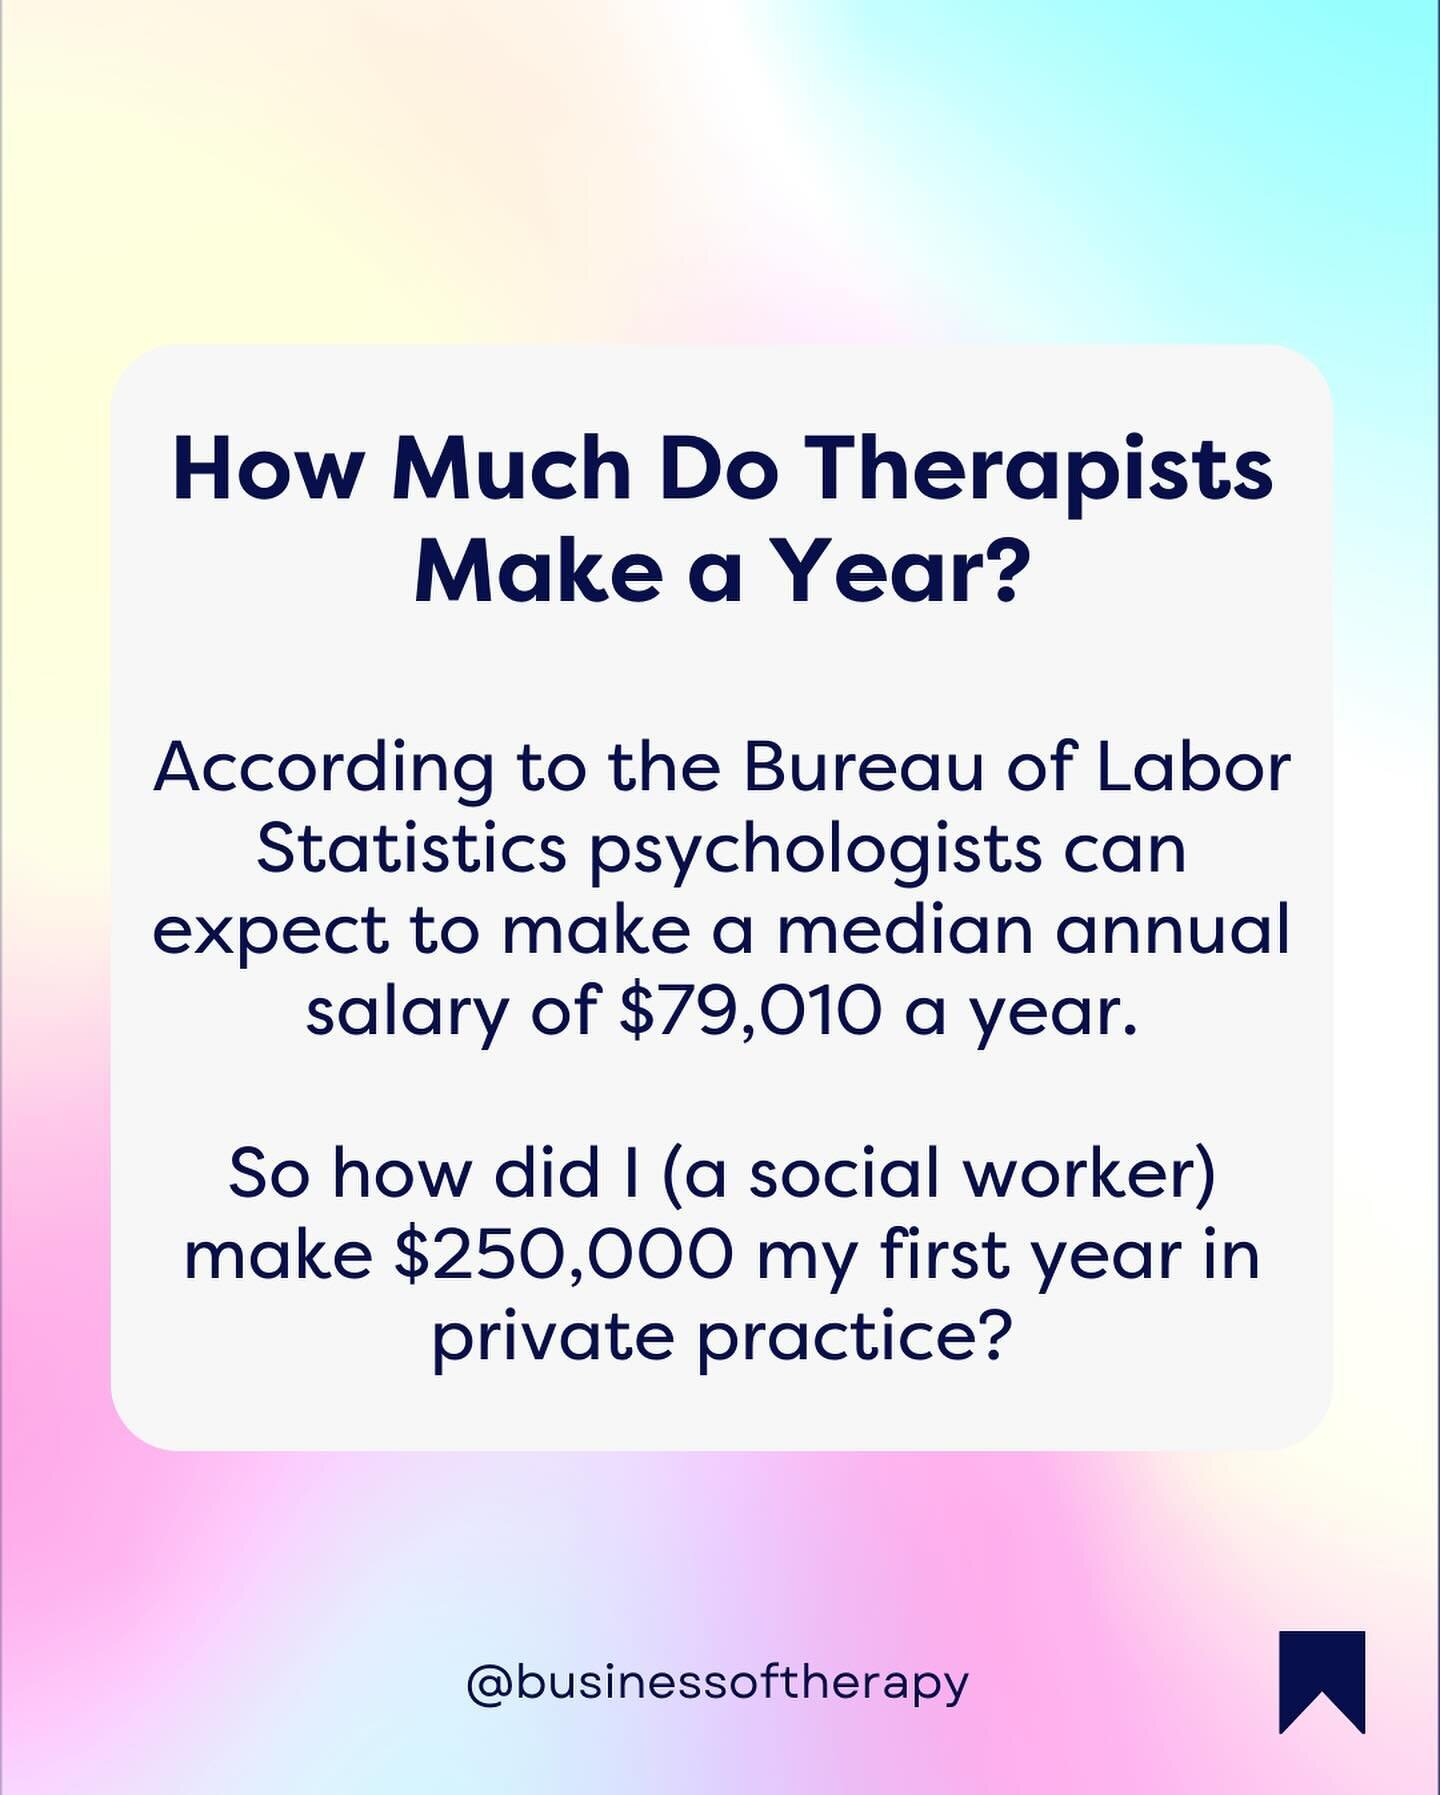 Are you tired of feeling undervalued and underpaid for your hard work? It's time to take control of your income and build the private practice of your dreams.

Did you know that the average psychologist earns around $79,010 annually? But with a few s